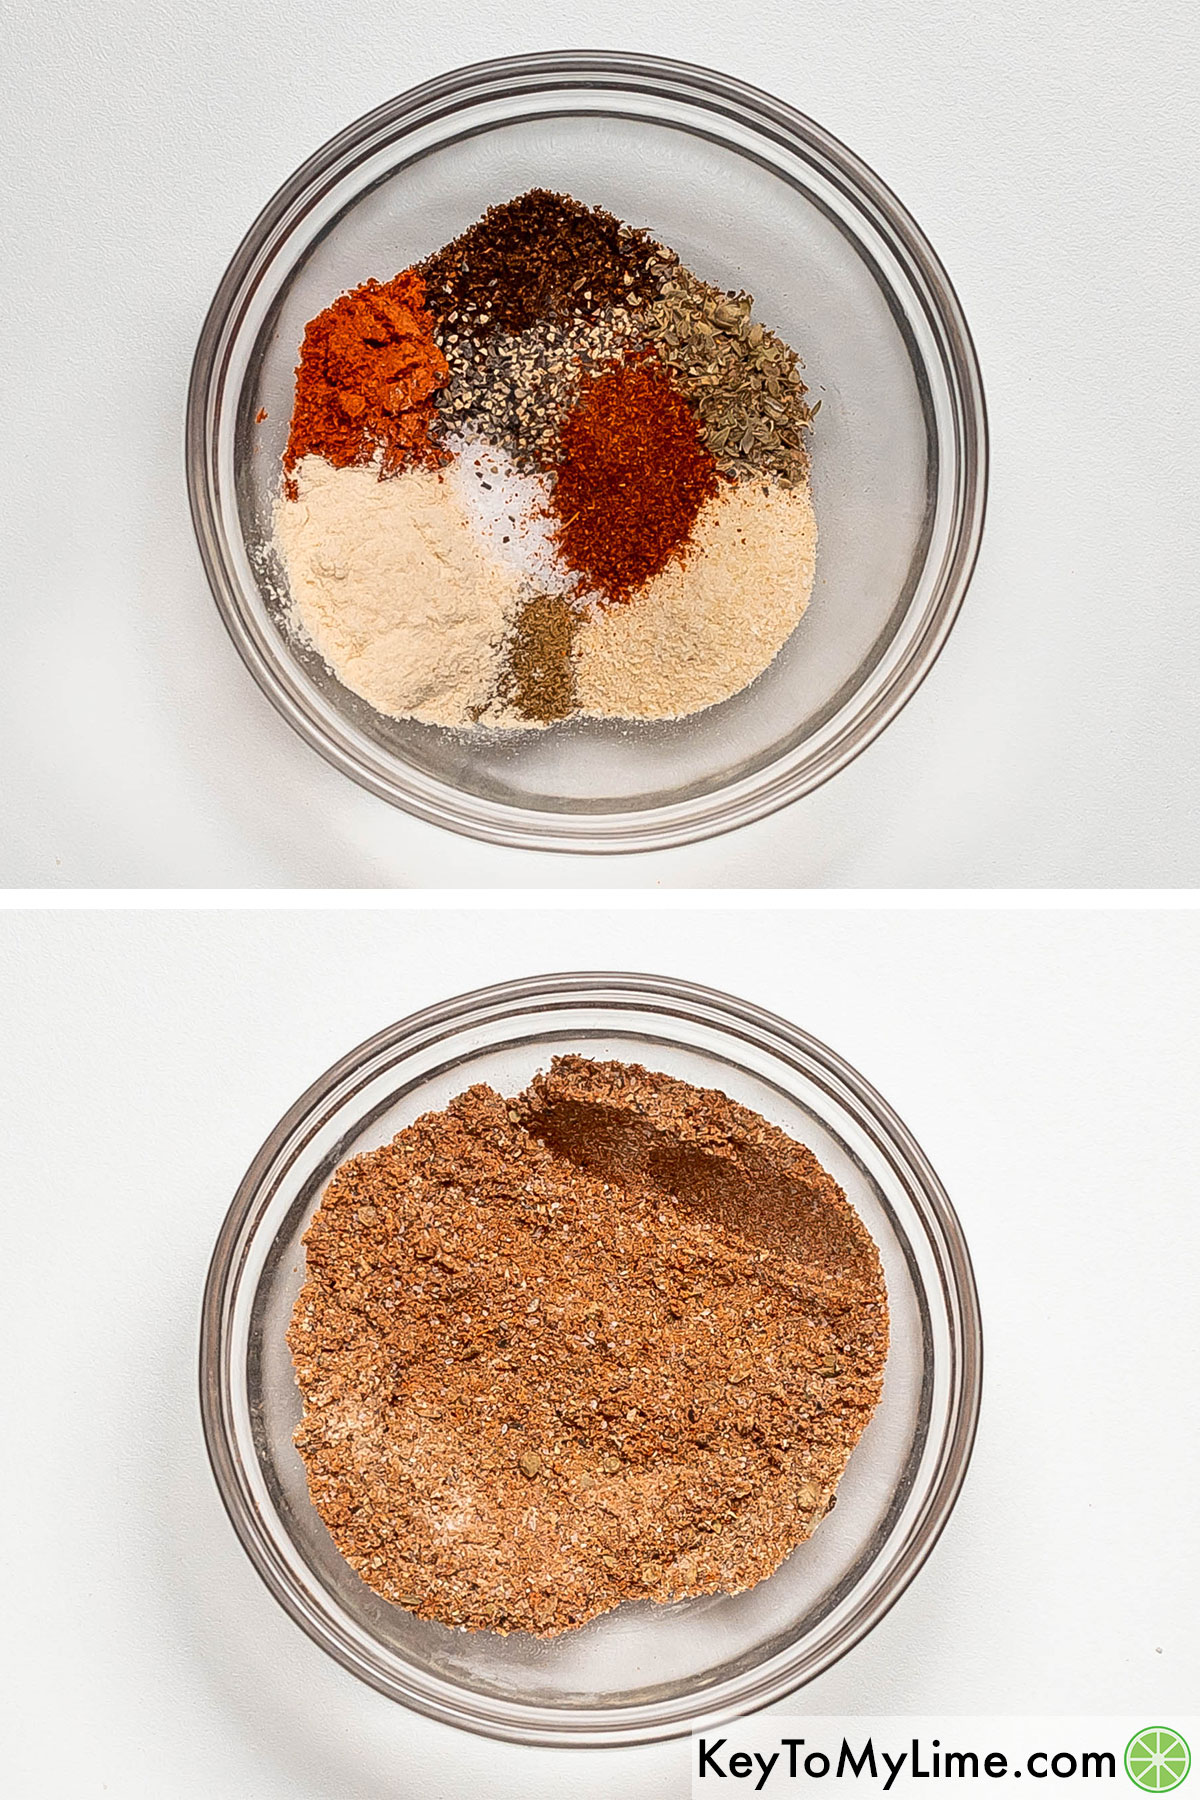 Adding the dry spices to form a rub in a small mixing bowl and whisking together.